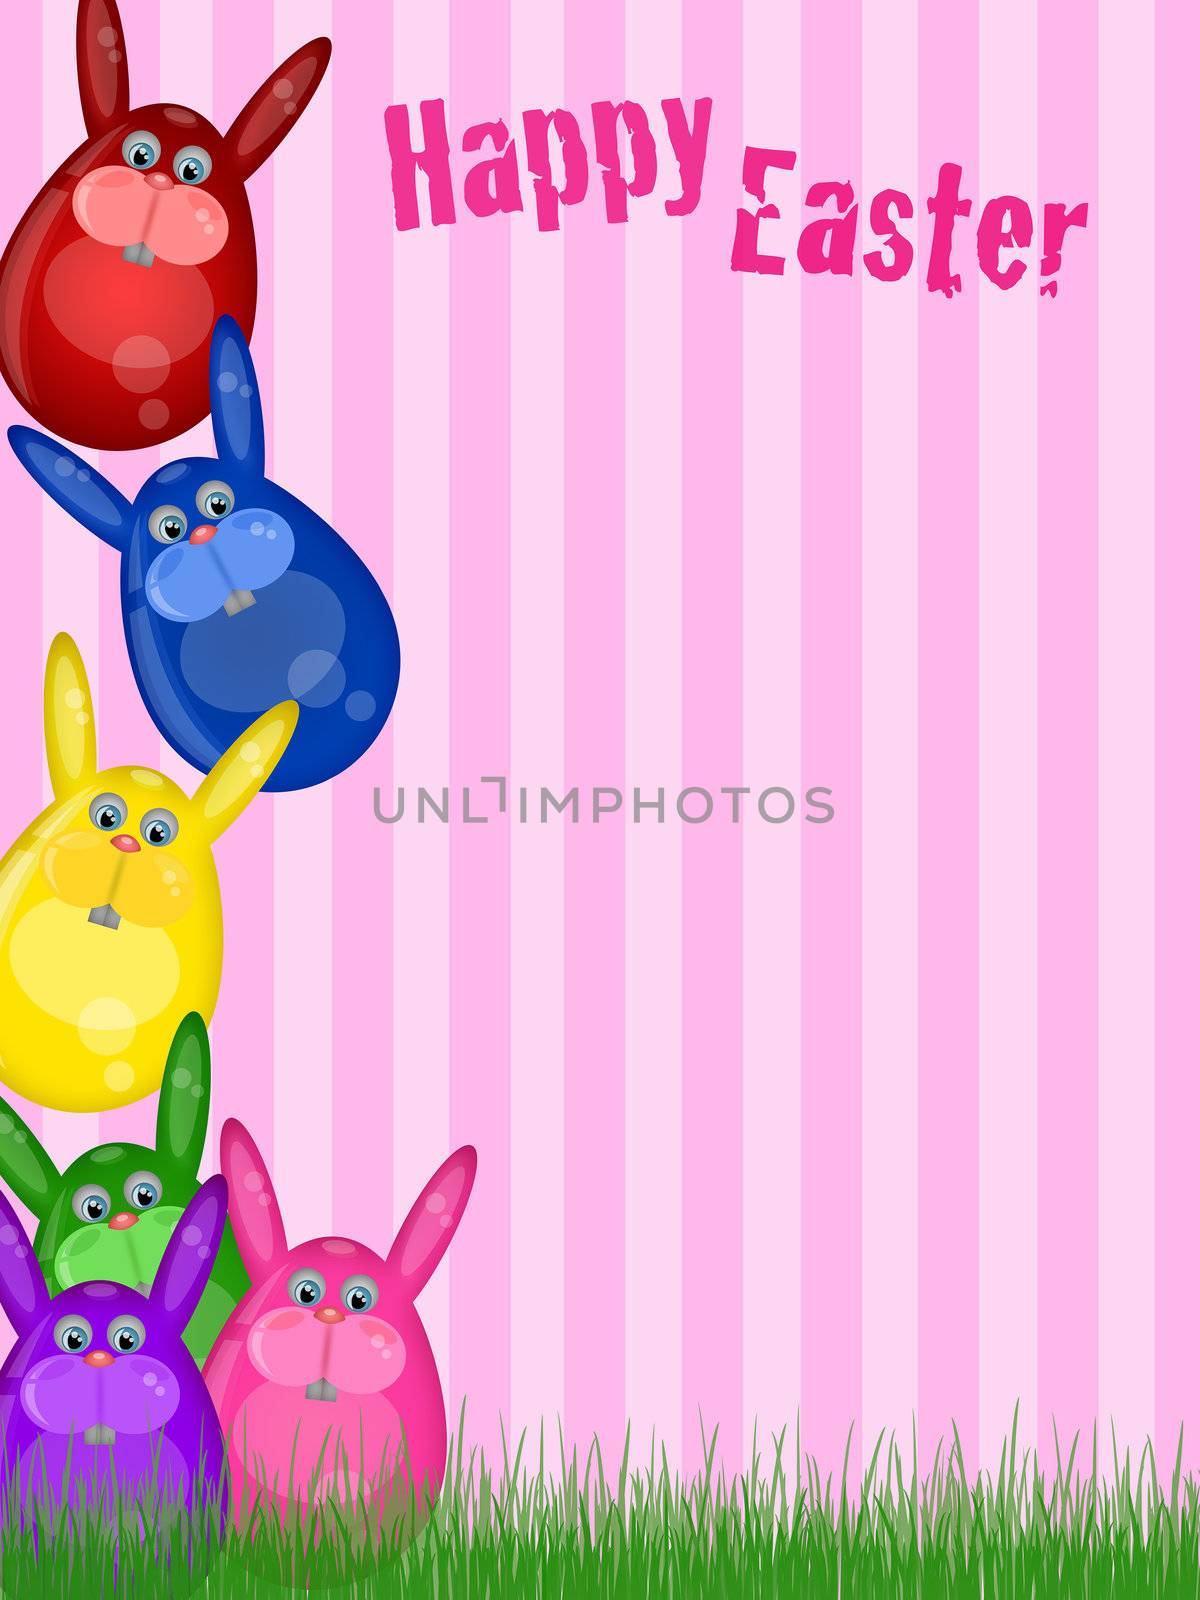 Happy Easter Bunny Background by Davidgn